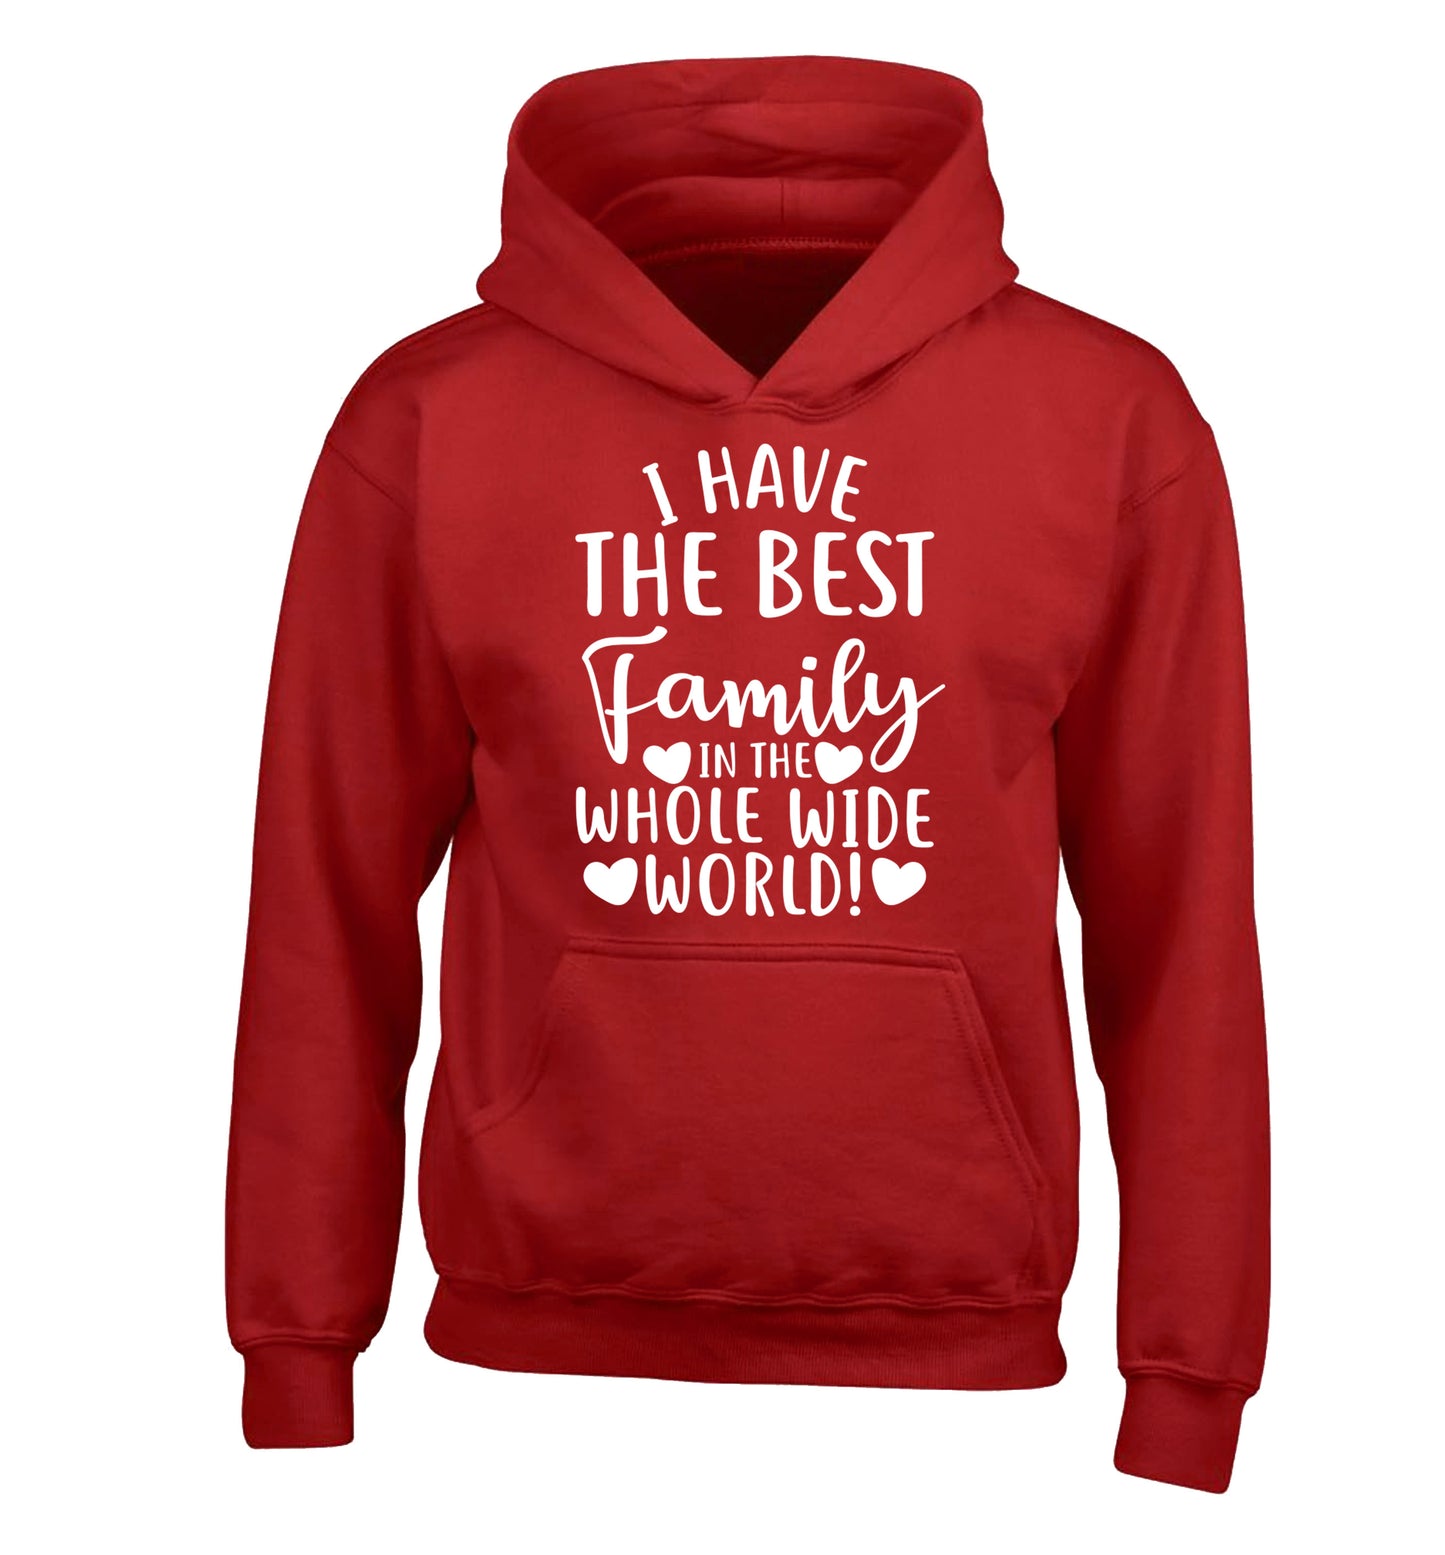 I have the best family in the whole wide world! children's red hoodie 12-13 Years